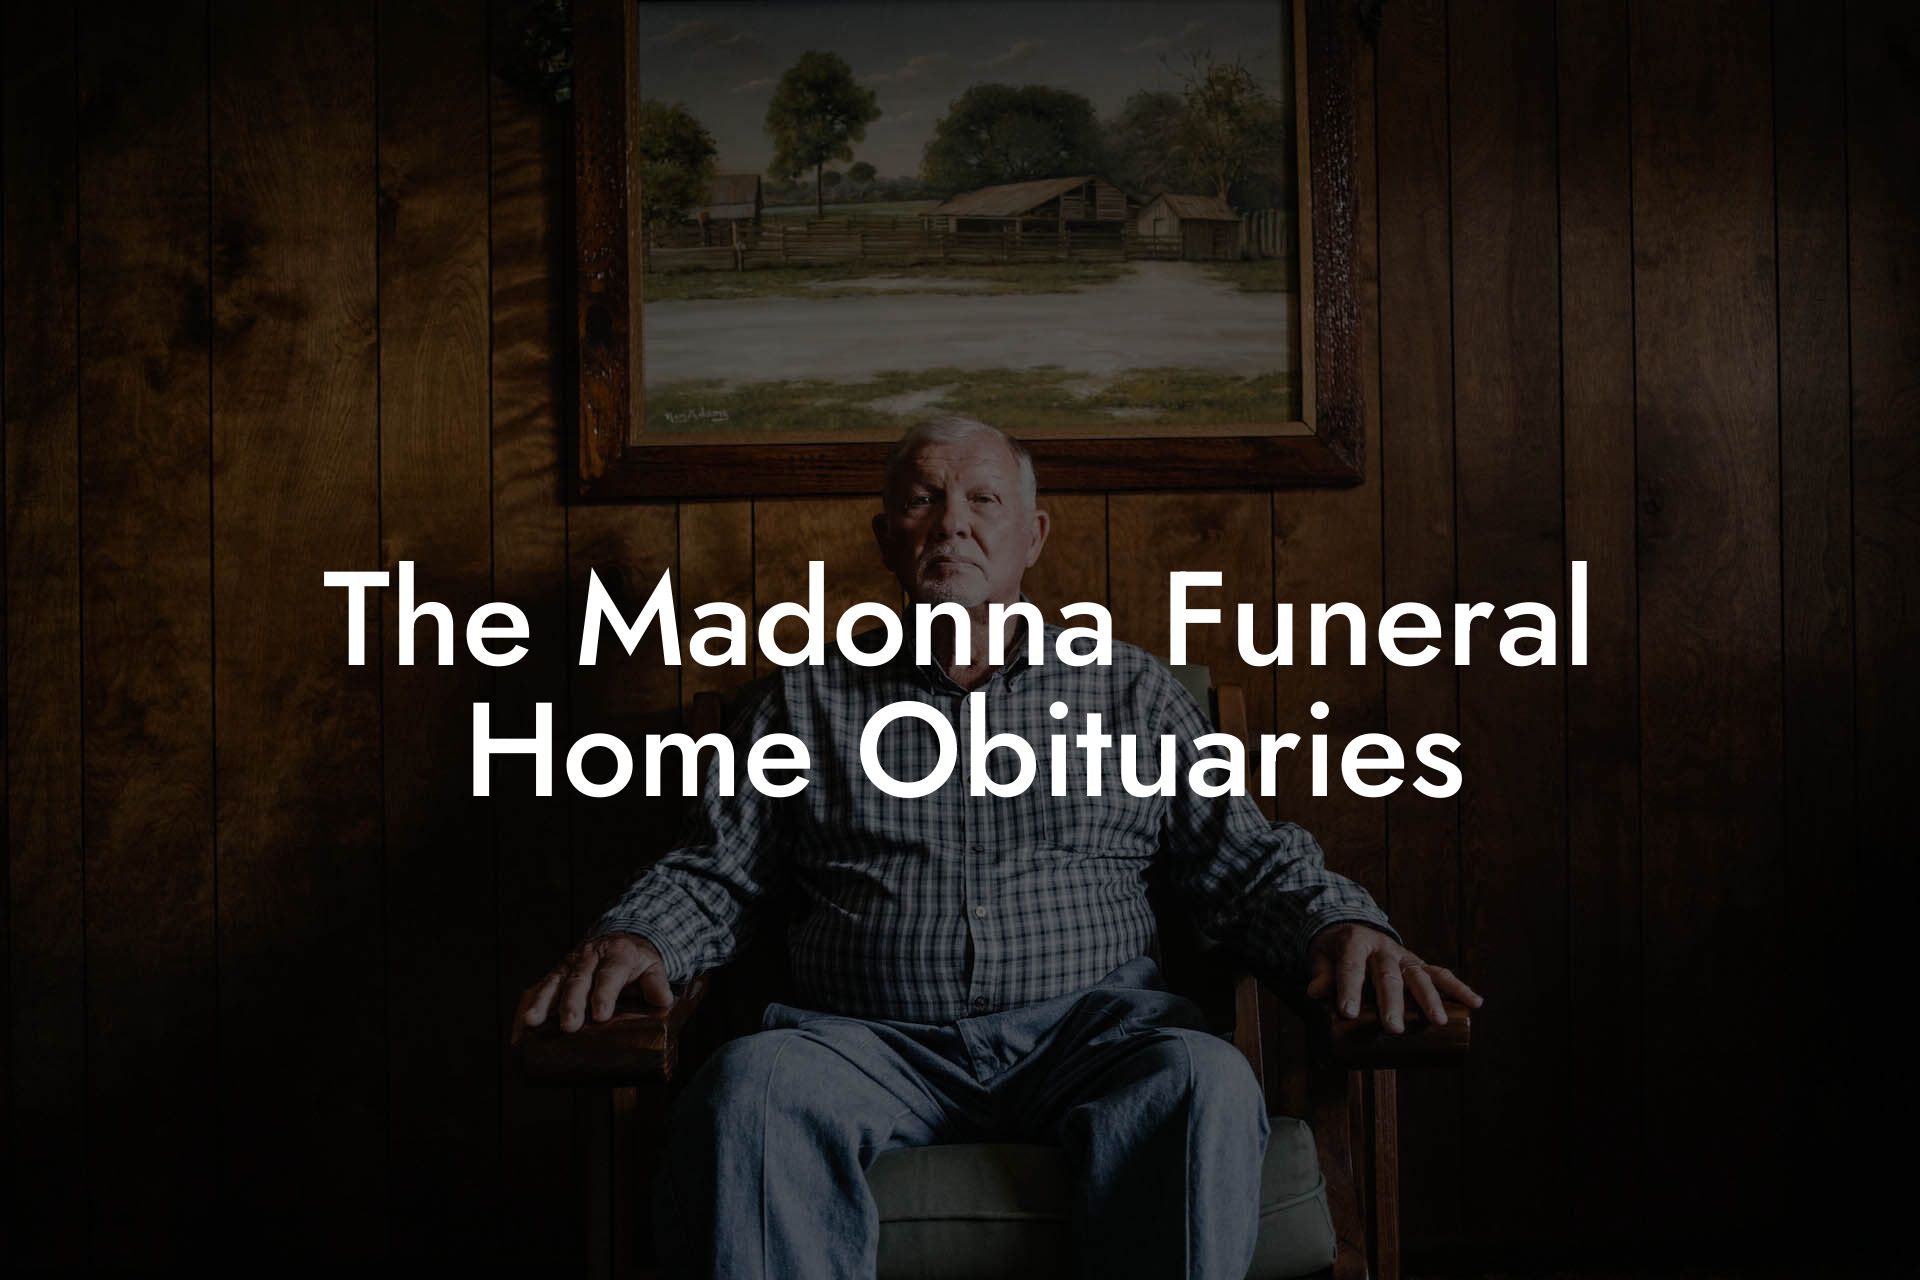 The Madonna Funeral Home Obituaries